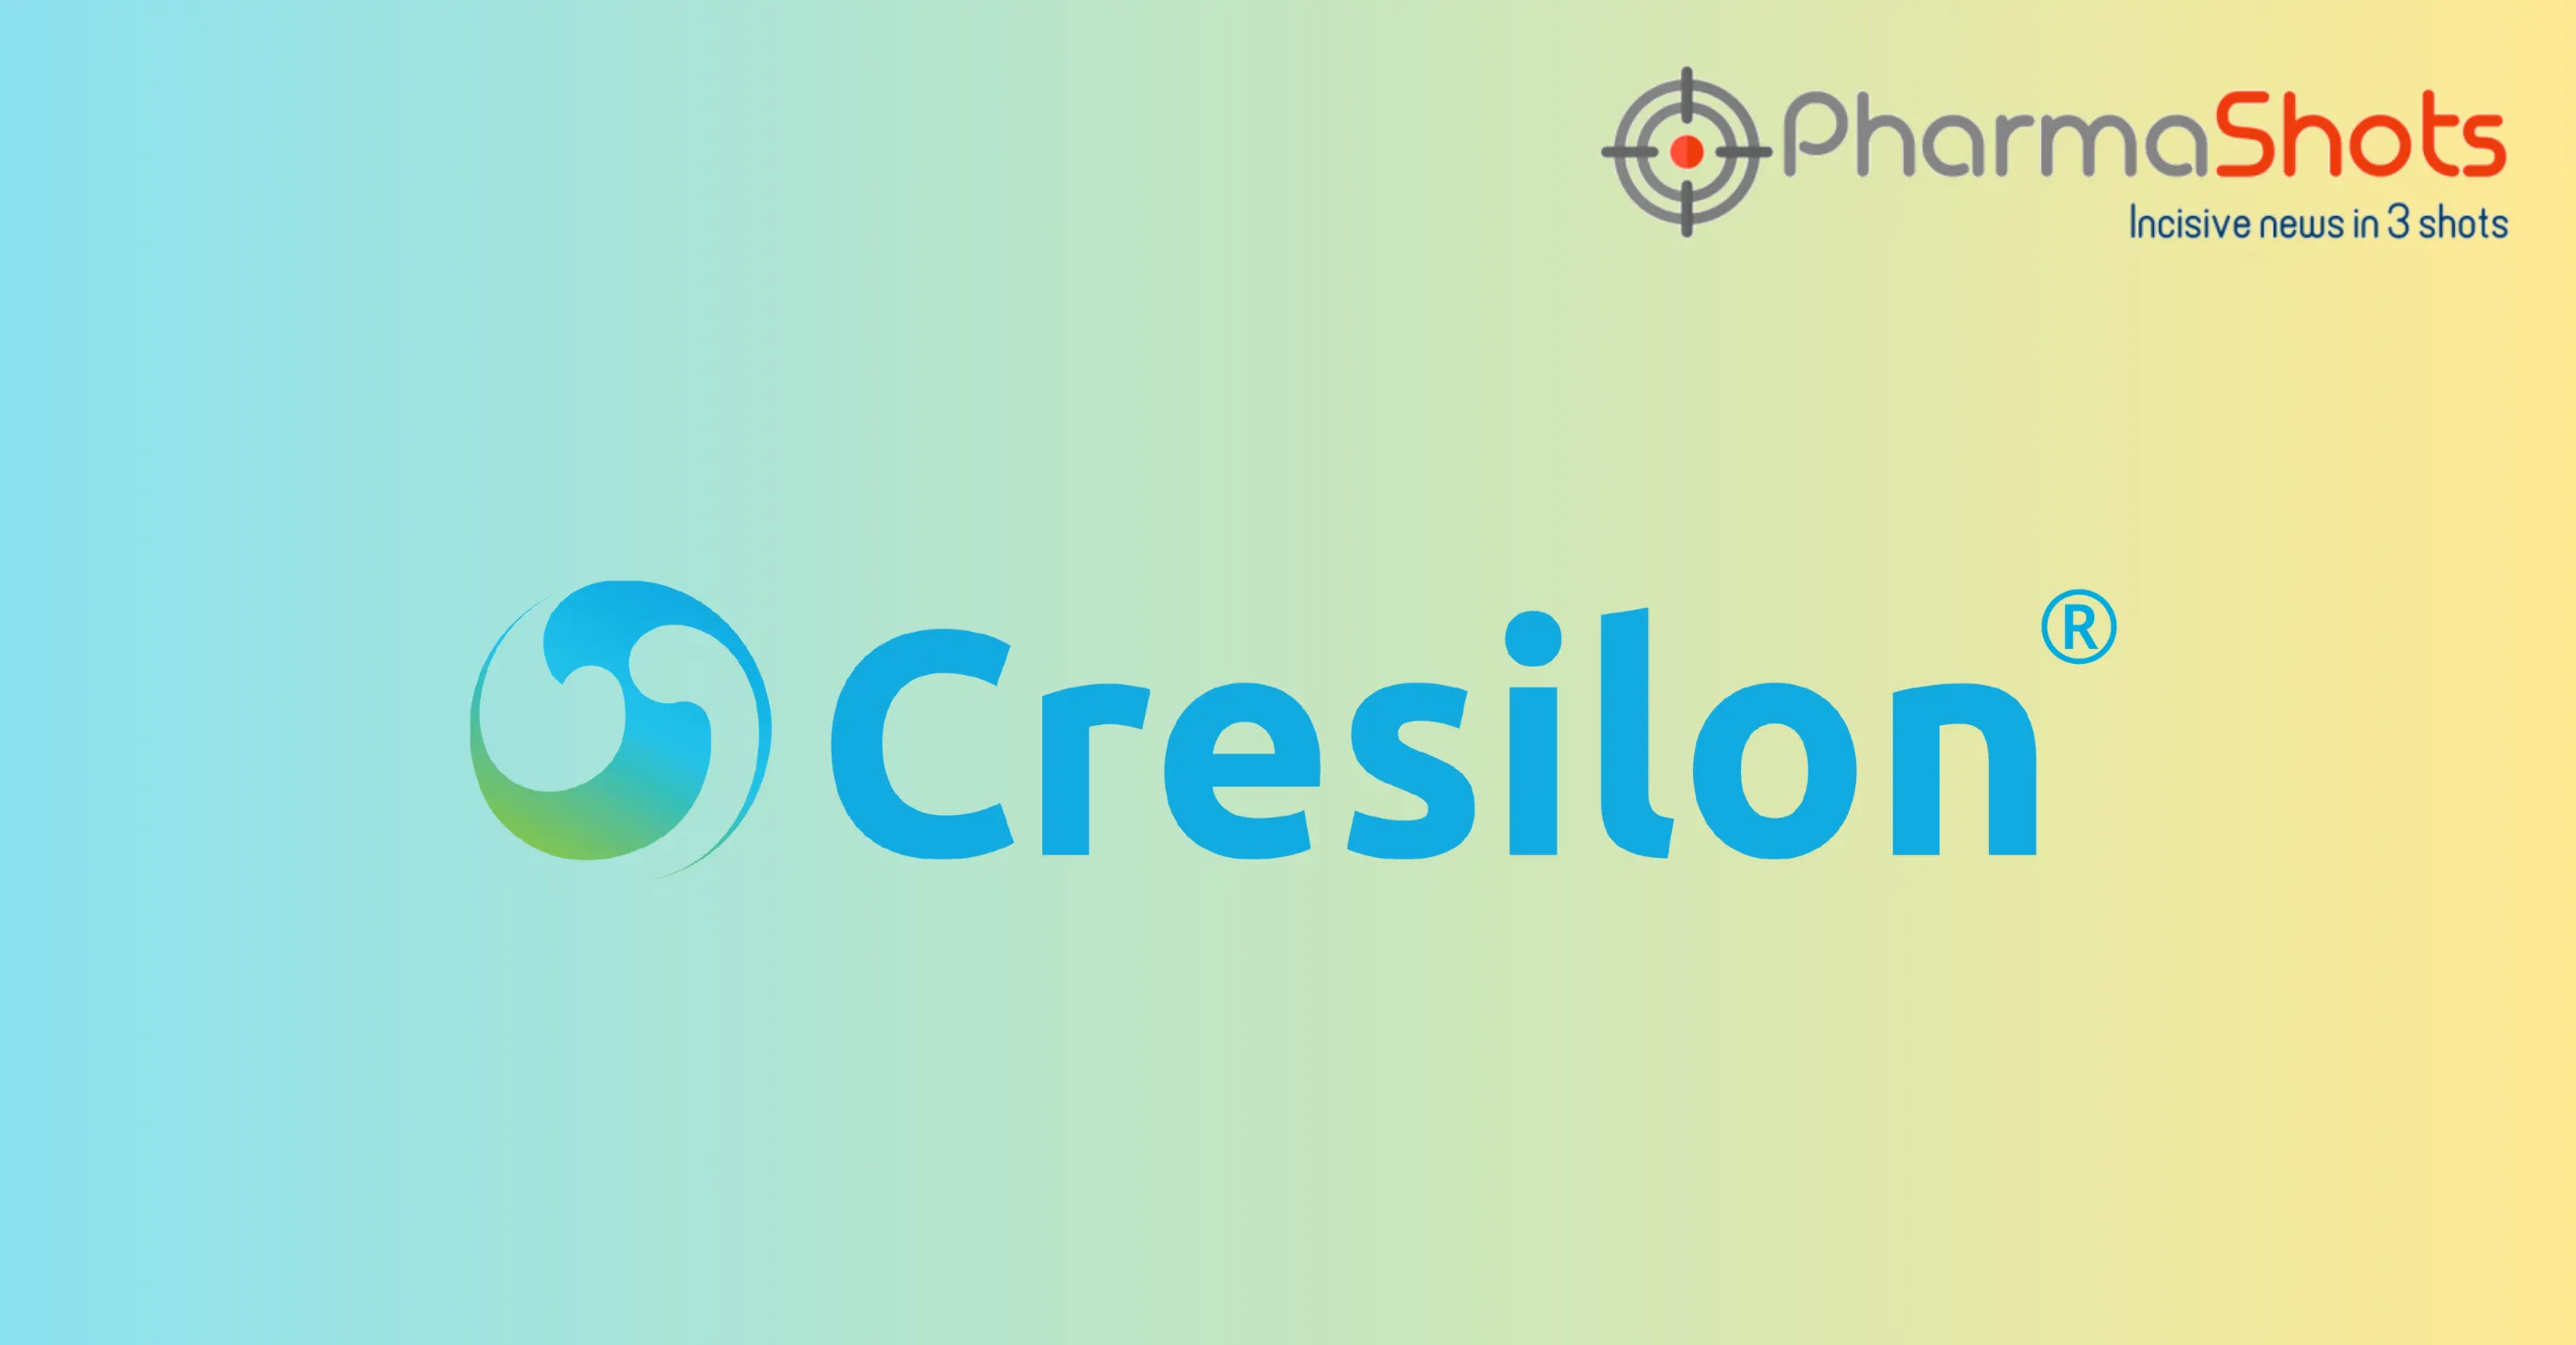 Cresilon Introduces an Animal Philanthropy Program to Provide Surgeries for Animals in Critical Need